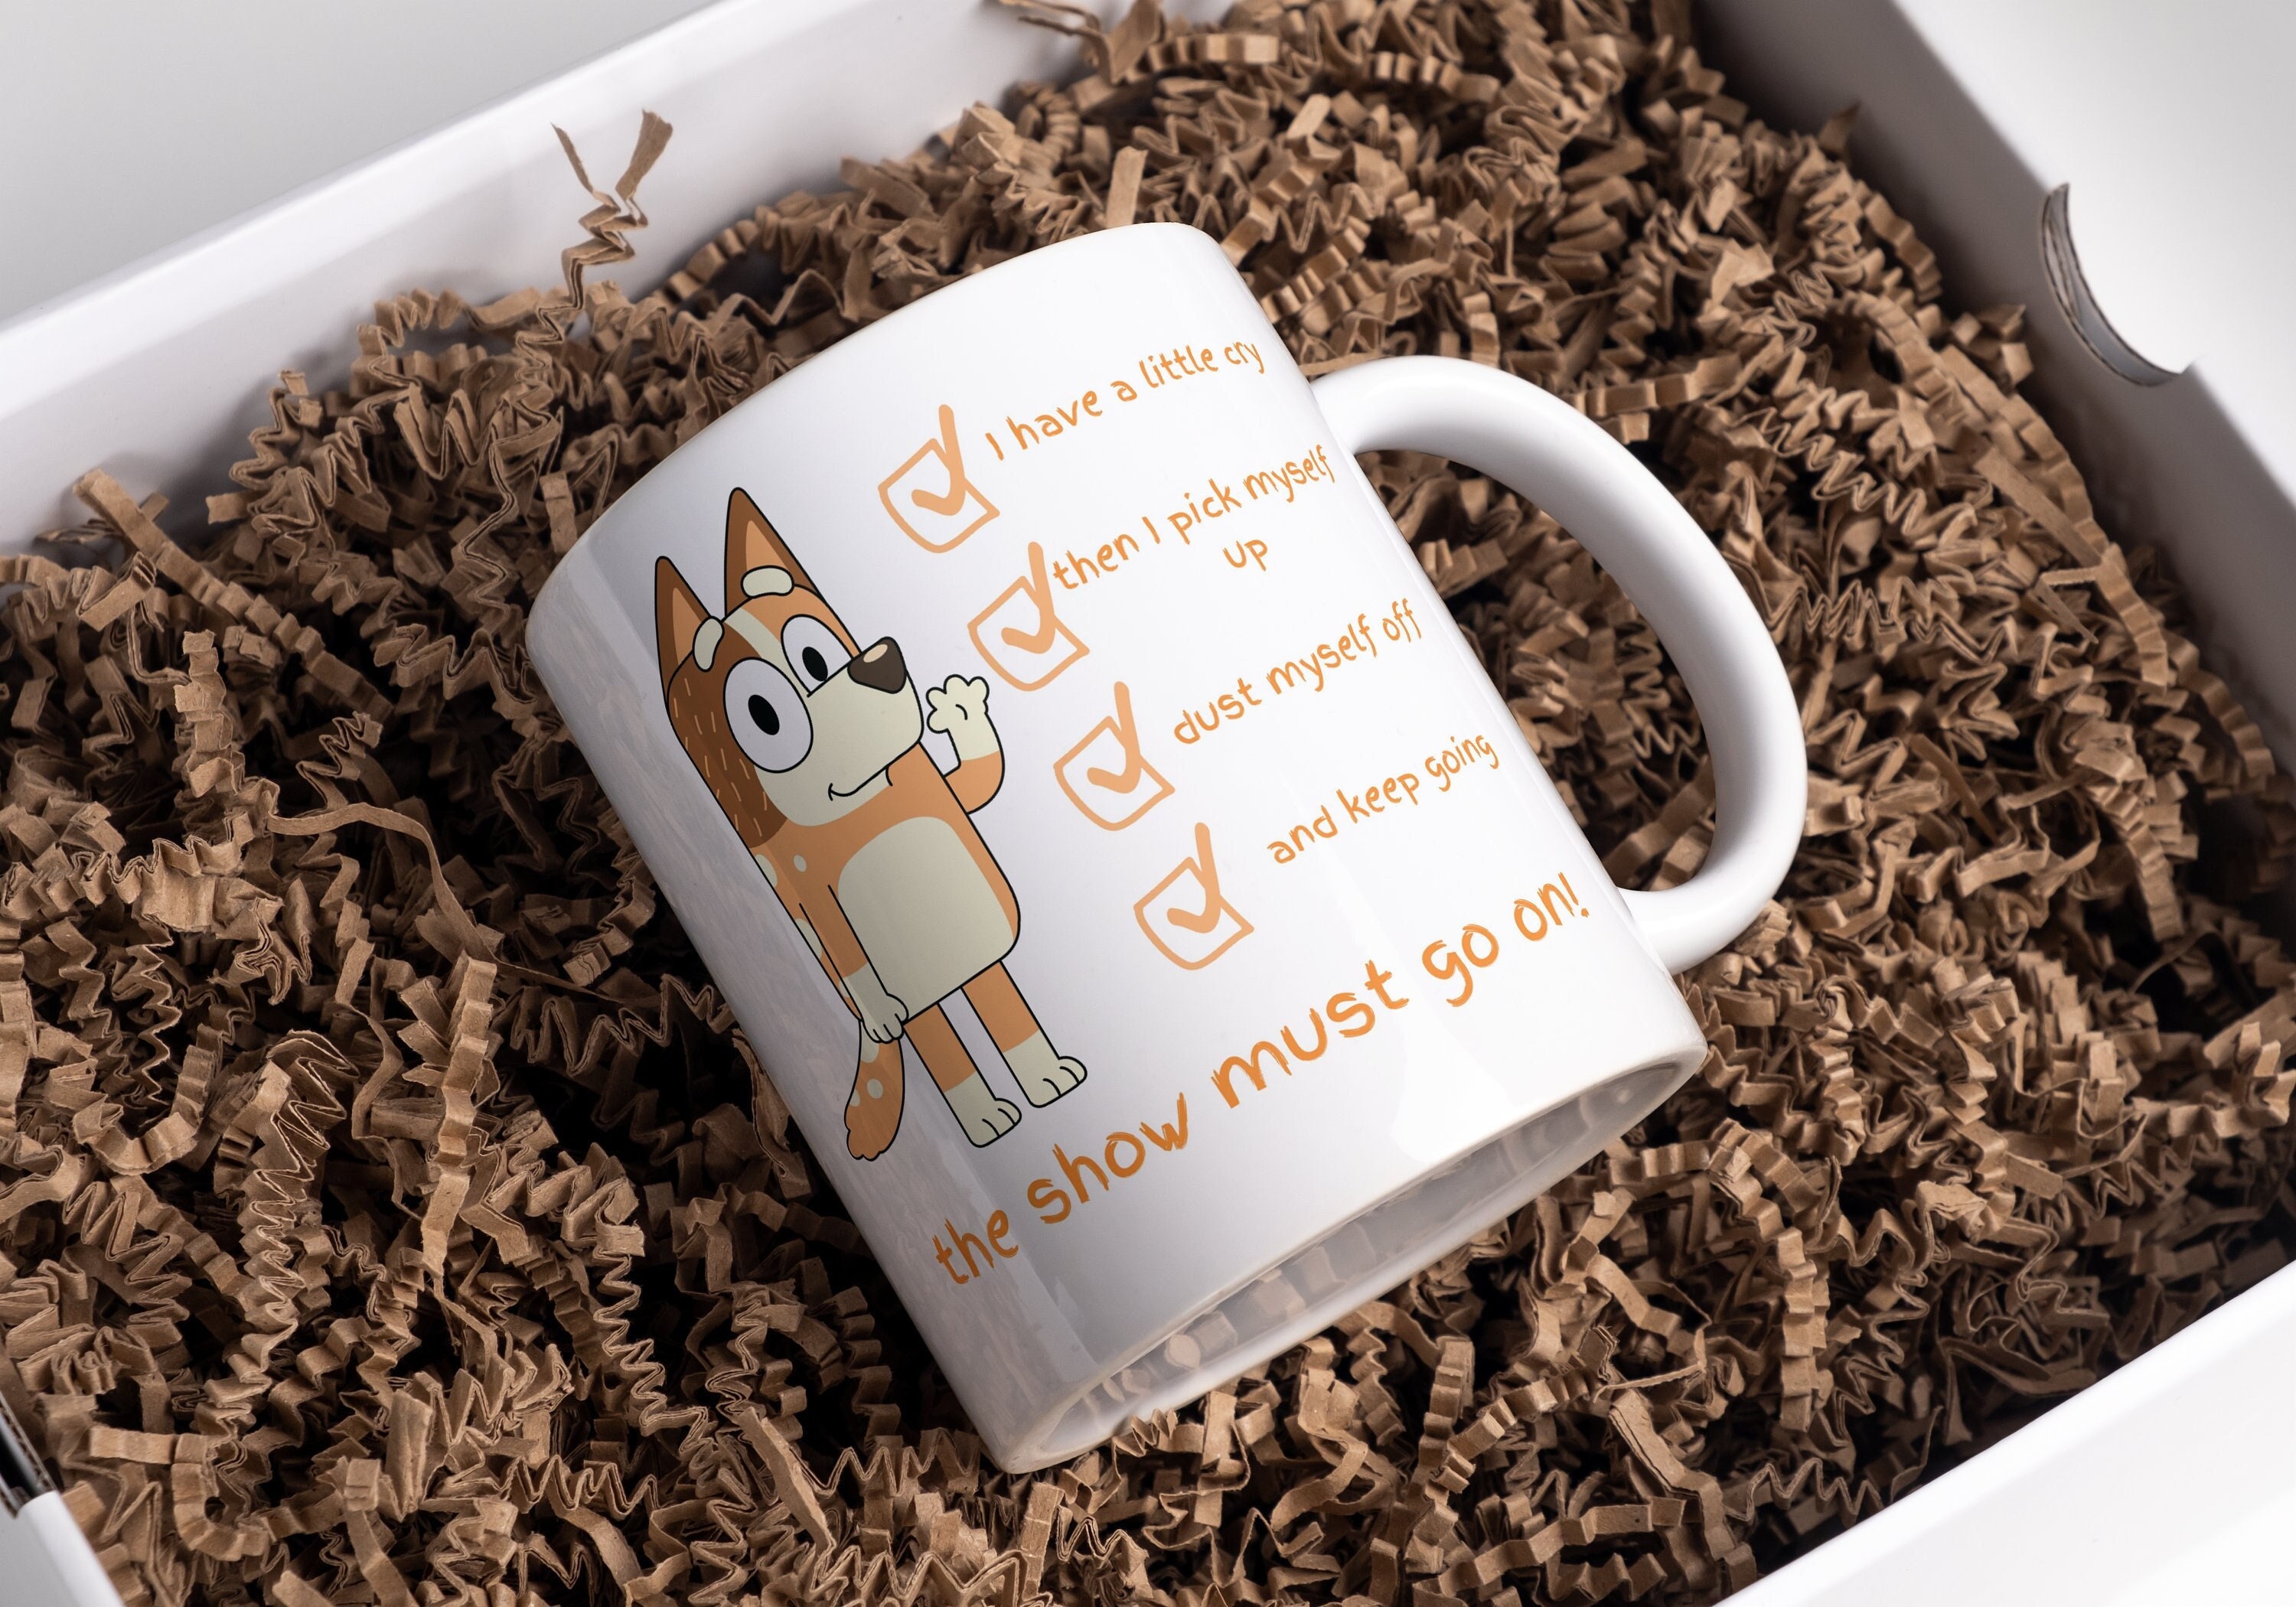 Unicorse Bluey Mug, Bluey Mug , Unicorse Mug , Bluey Unicorse, Gift Mug,  Christmas Mugs, Bluey Gift, Bluey Cup 